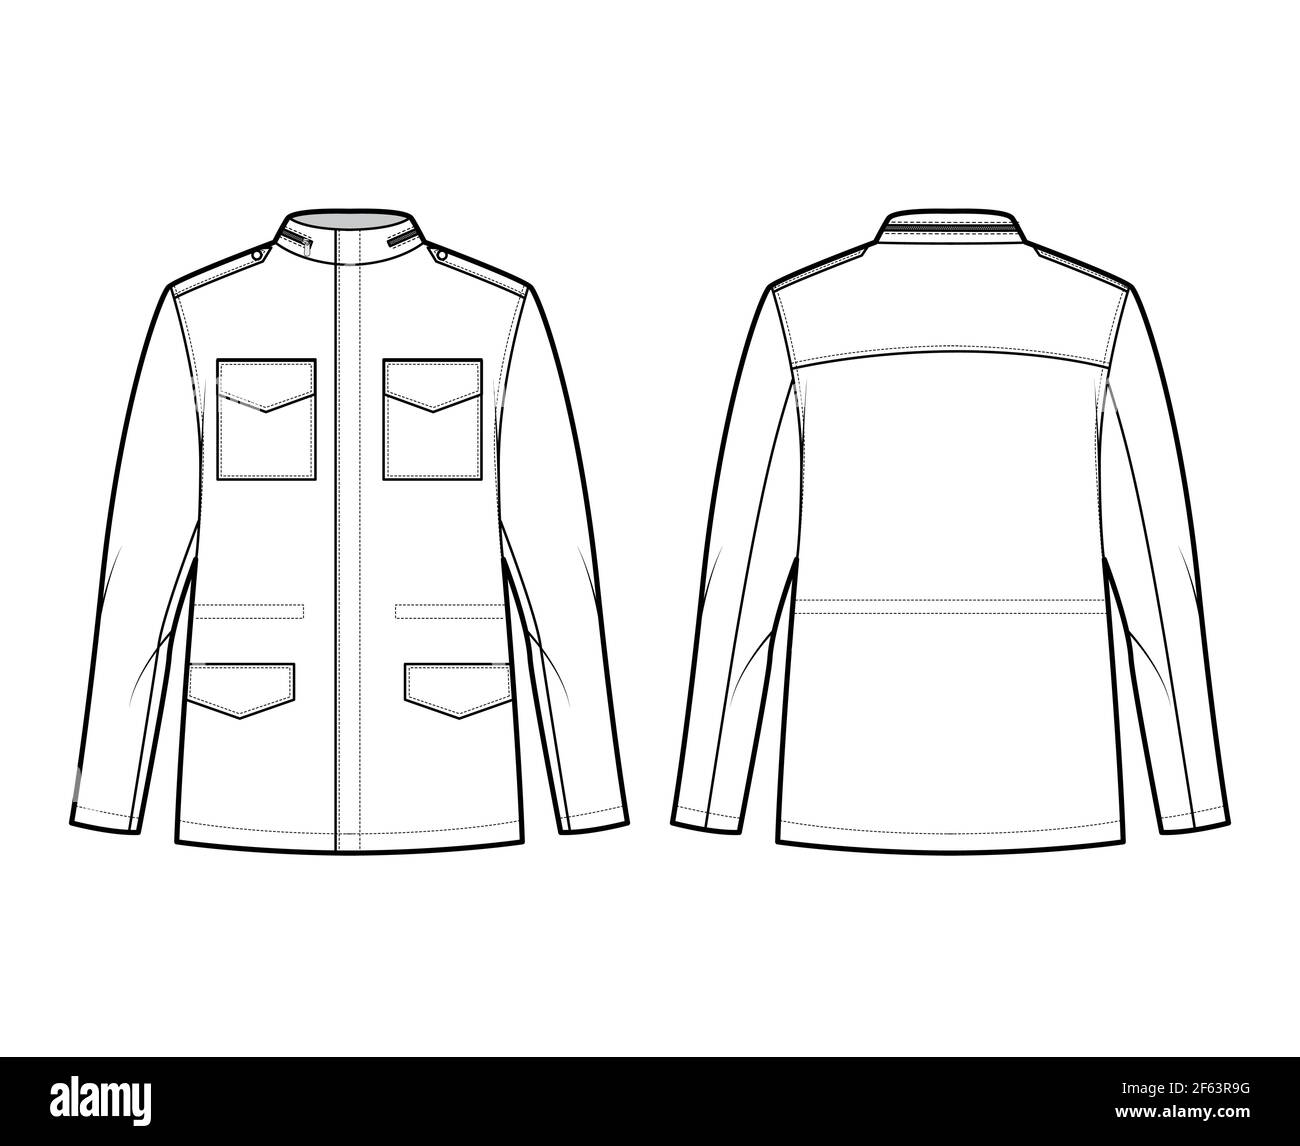 M-65 field jacket technical fashion illustration with oversized, stand collar, long sleeves, flap pockets, epaulettes. Flat coat template front, back white color style. Women men unisex top CAD mockup Stock Vector